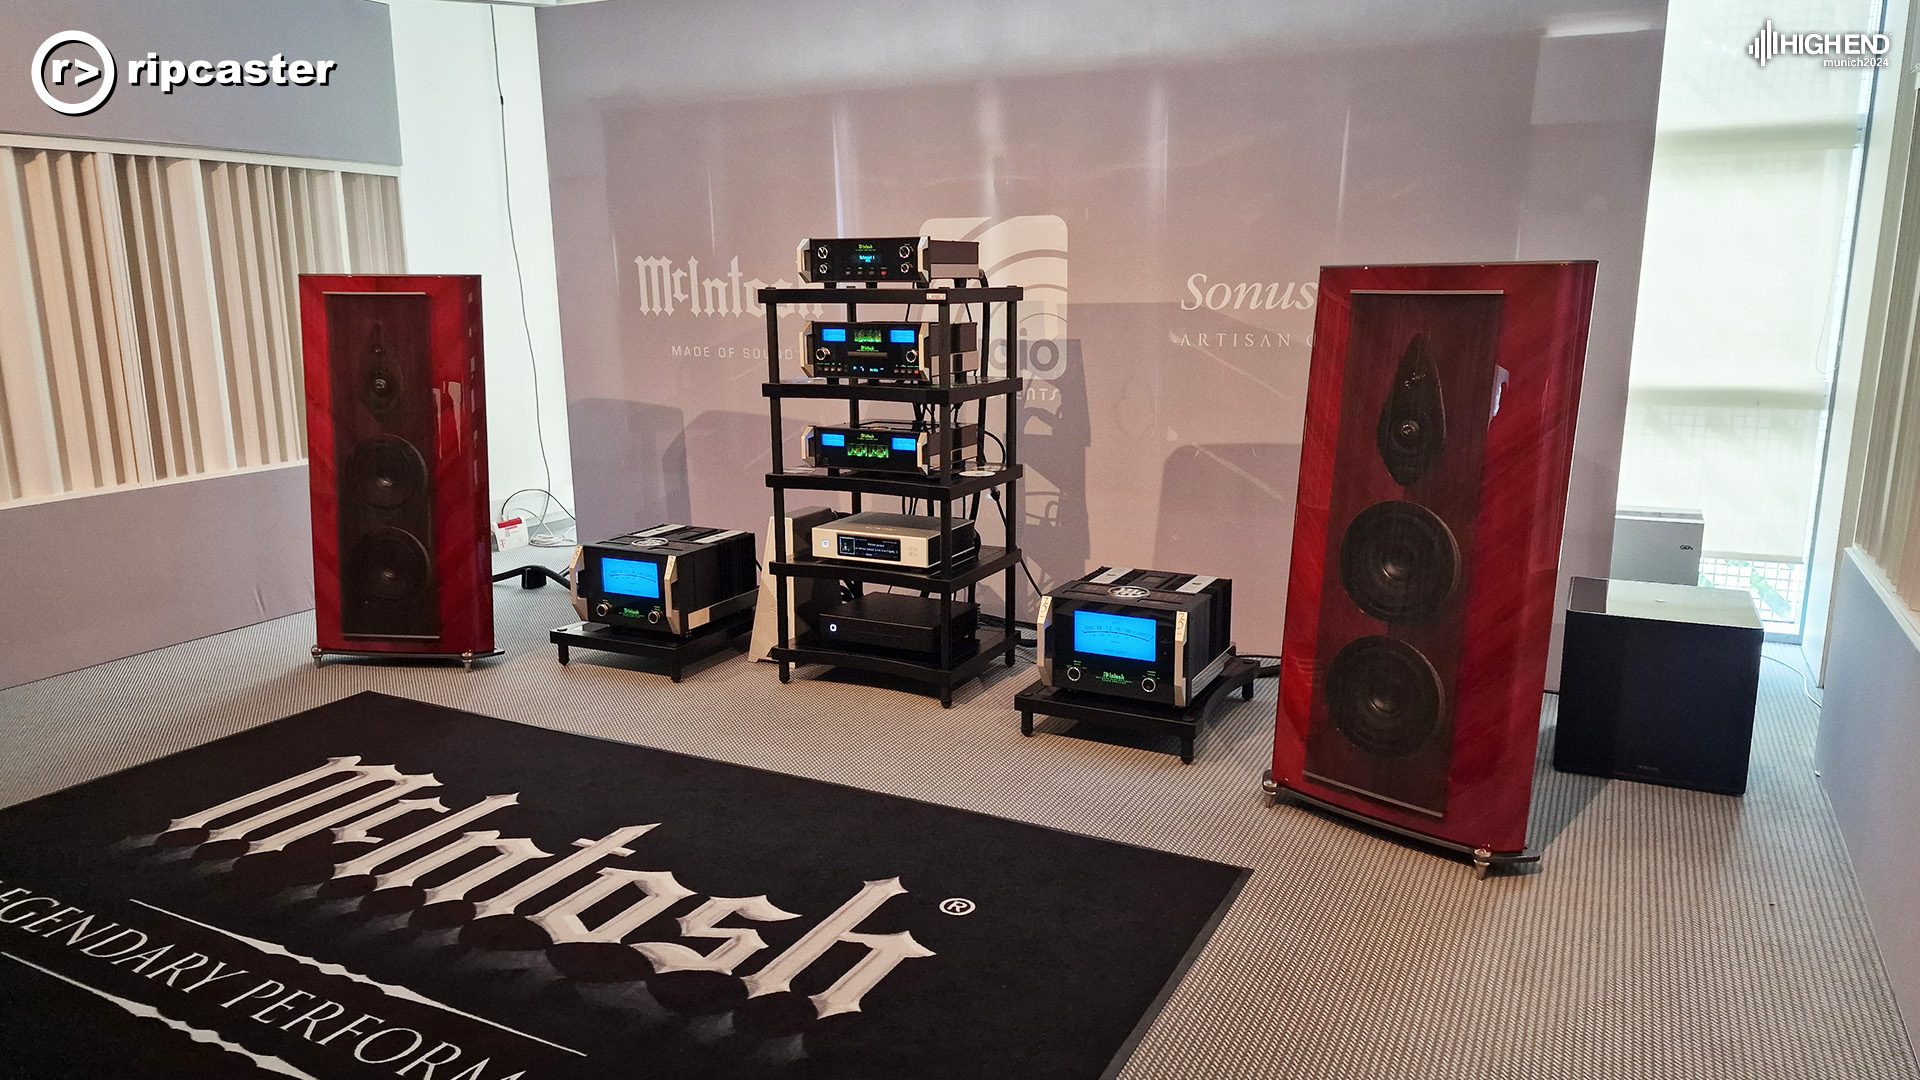 McIntosh.  A pair of floorstanding red speakers either side of a rack of HiFi equipment